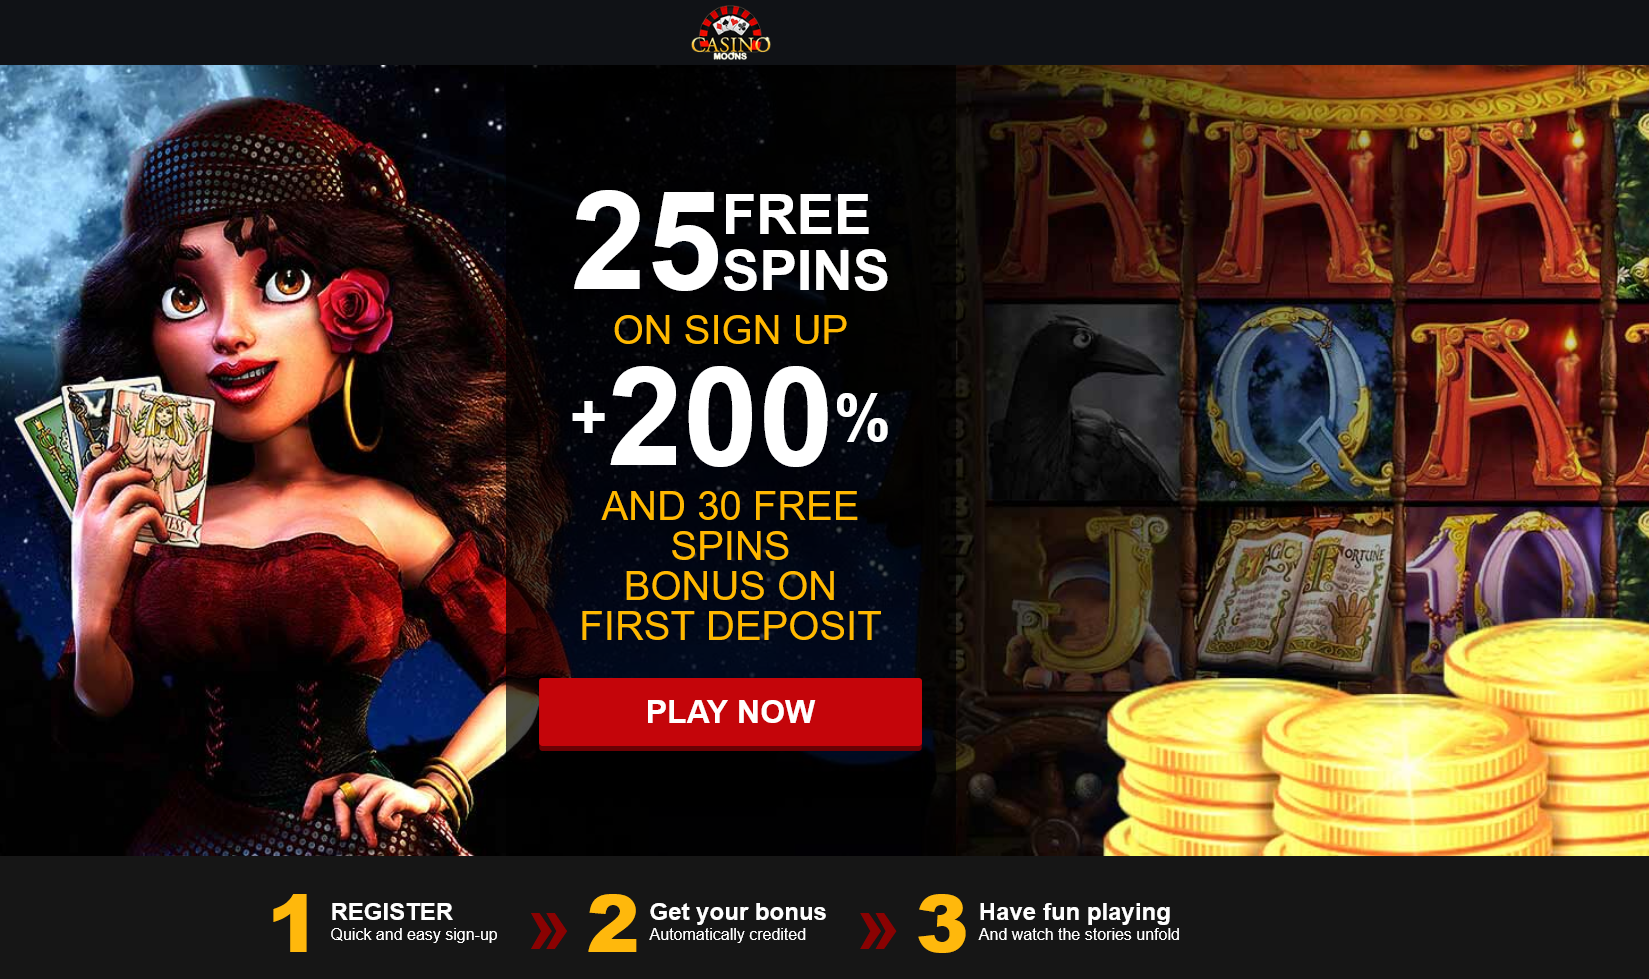 25 FREE SPINS ON SIGN UP